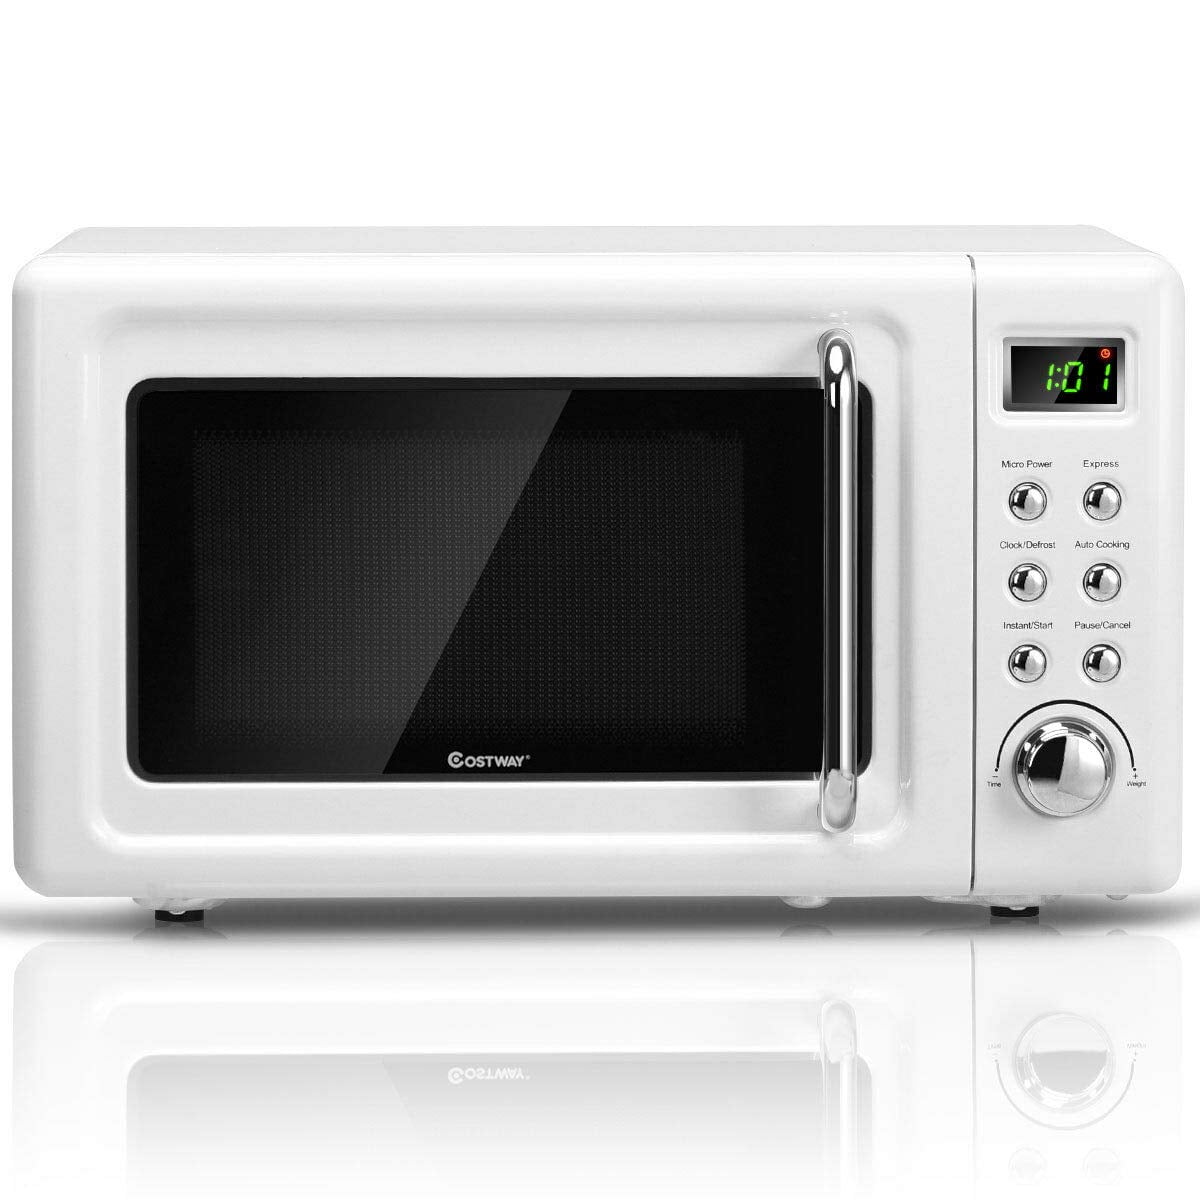 0.7Cu.ft 5 Micro Power COSTWAY Retro Countertop Microwave Oven with Glass Turntable & Viewing Window Delayed Start Function Child Lock LED Display 700-Watt White Cold Rolled Steel Plate